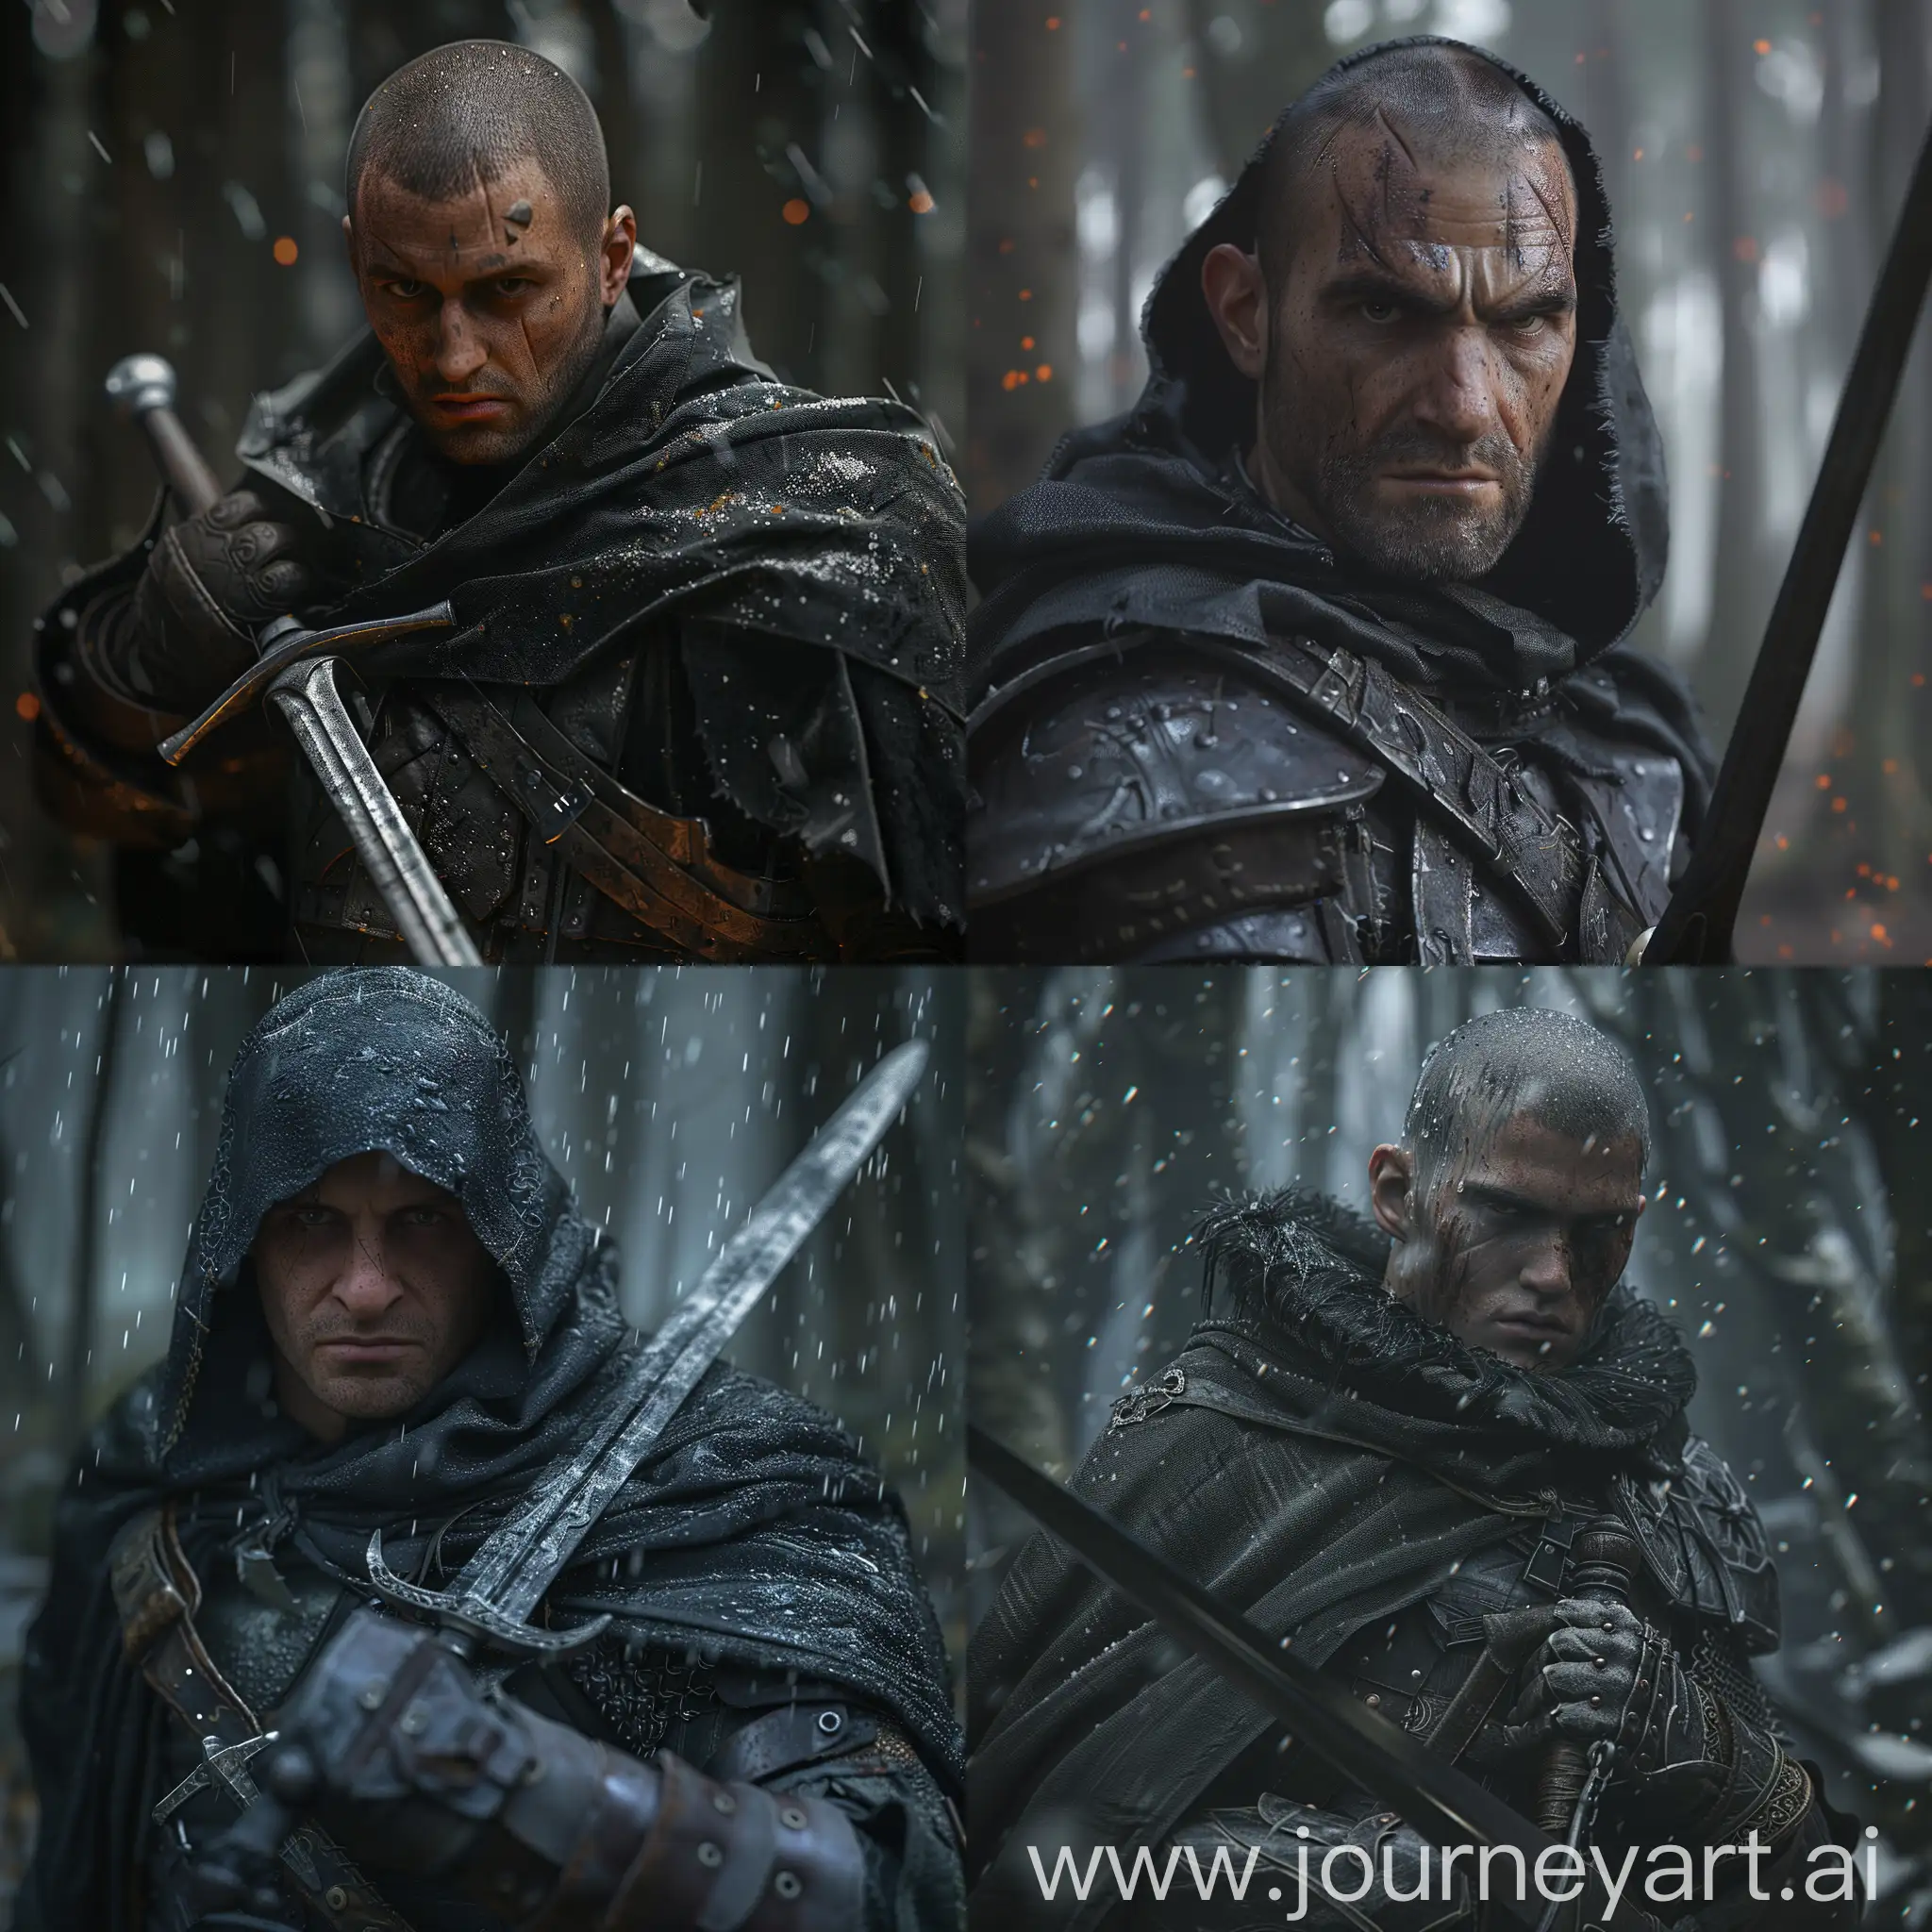 Grim-Ranger-in-Black-Cloak-and-Armor-with-Sword-in-Forest